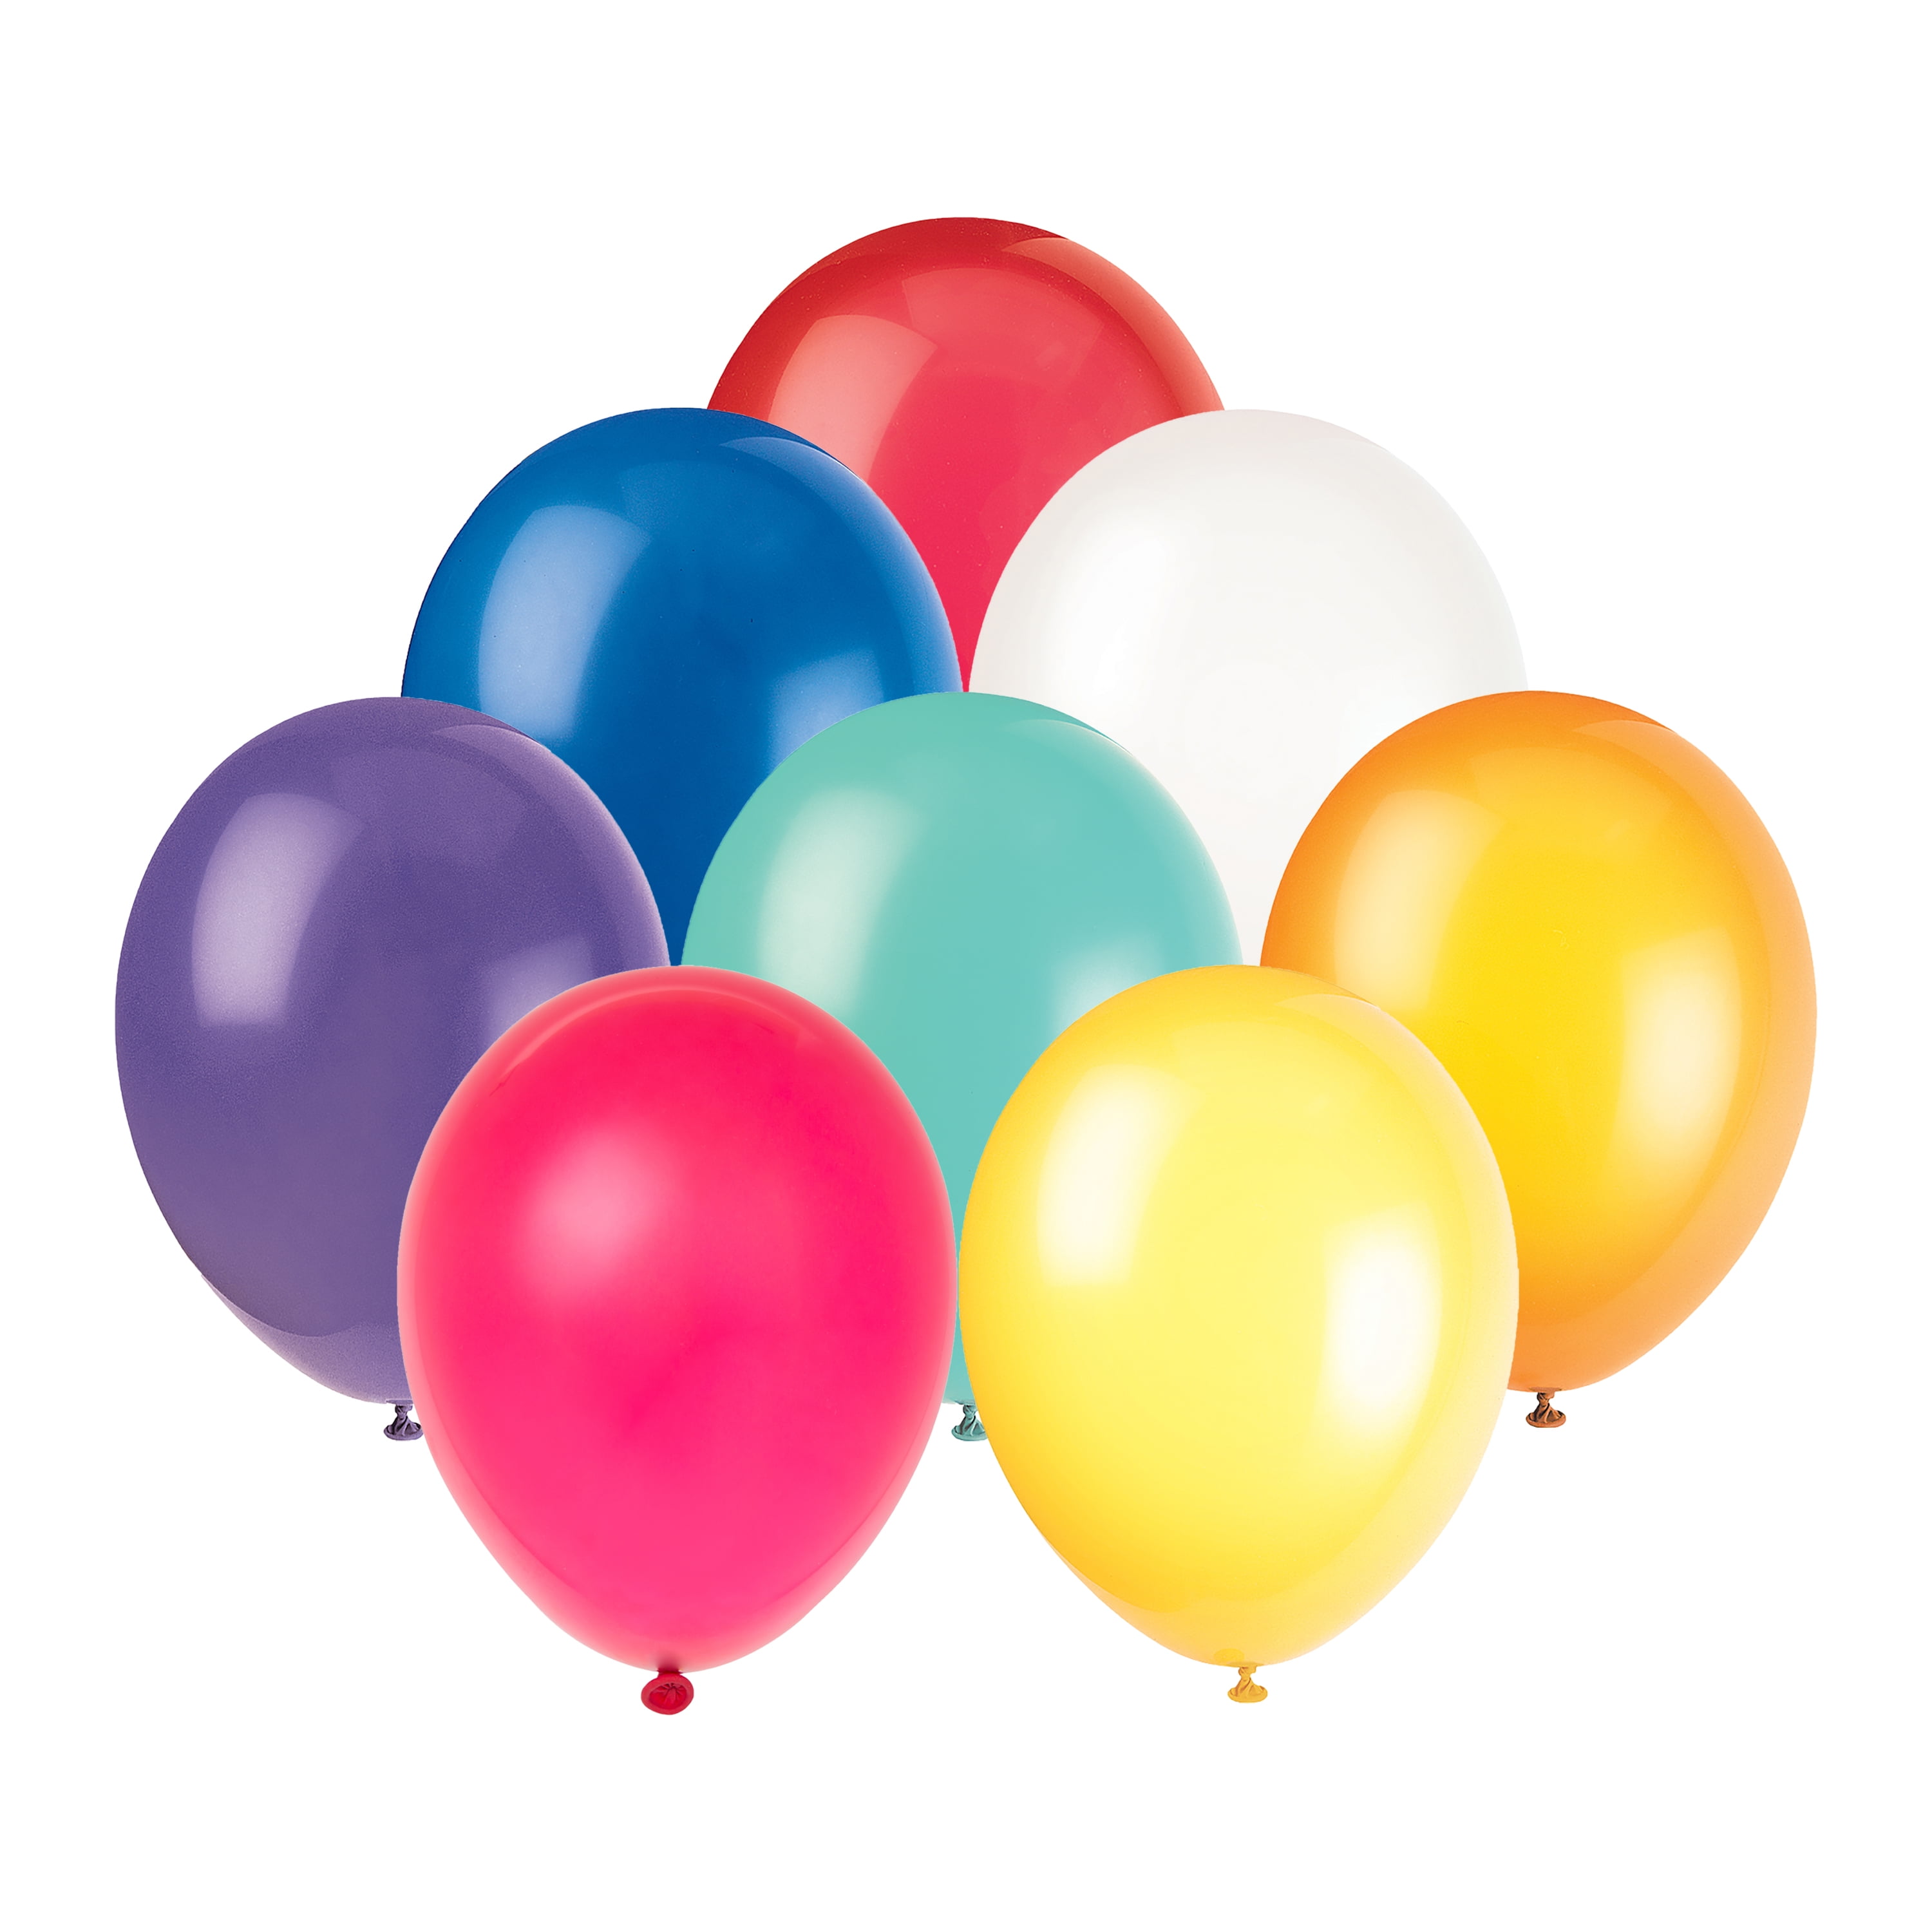 10 Pack of 12 Happy Birthday Balloons House Party Balloons Childrens Birthday Supplies Kids Birthday Decor Multicoloured Latex Balloons